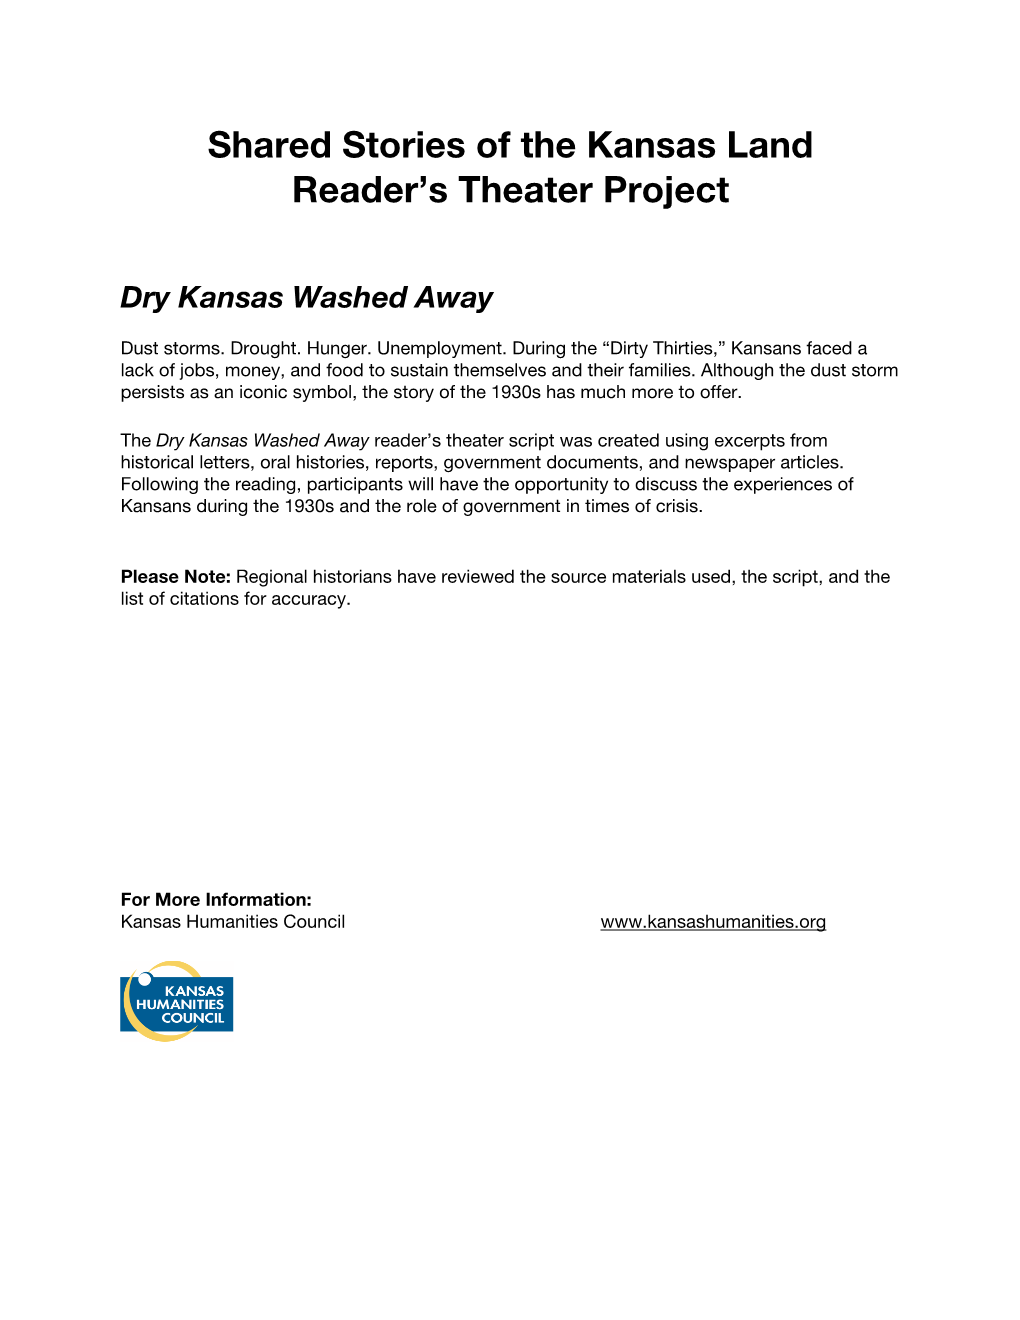 Shared Stories of the Kansas Land Reader's Theater Project